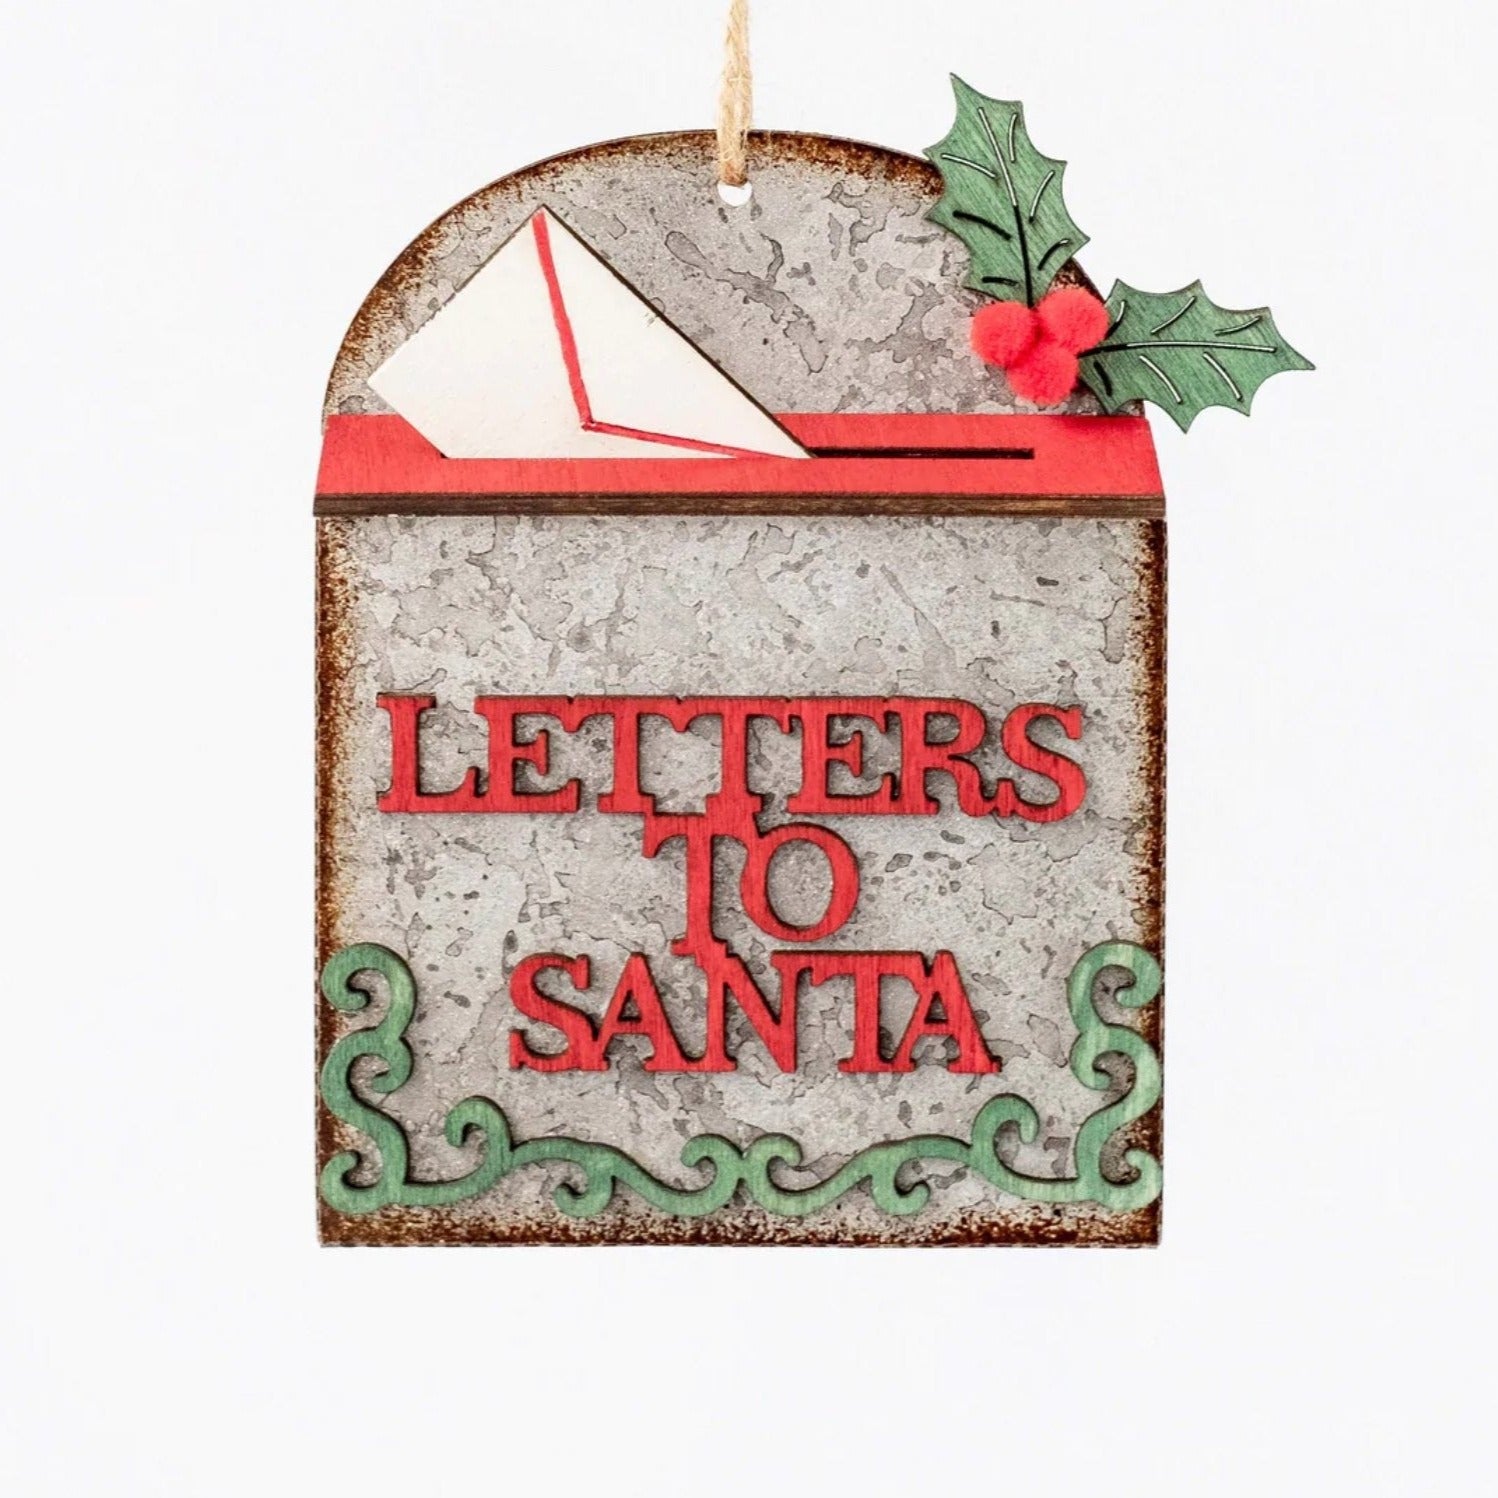 Letters to Santa Ornament - My Christmas